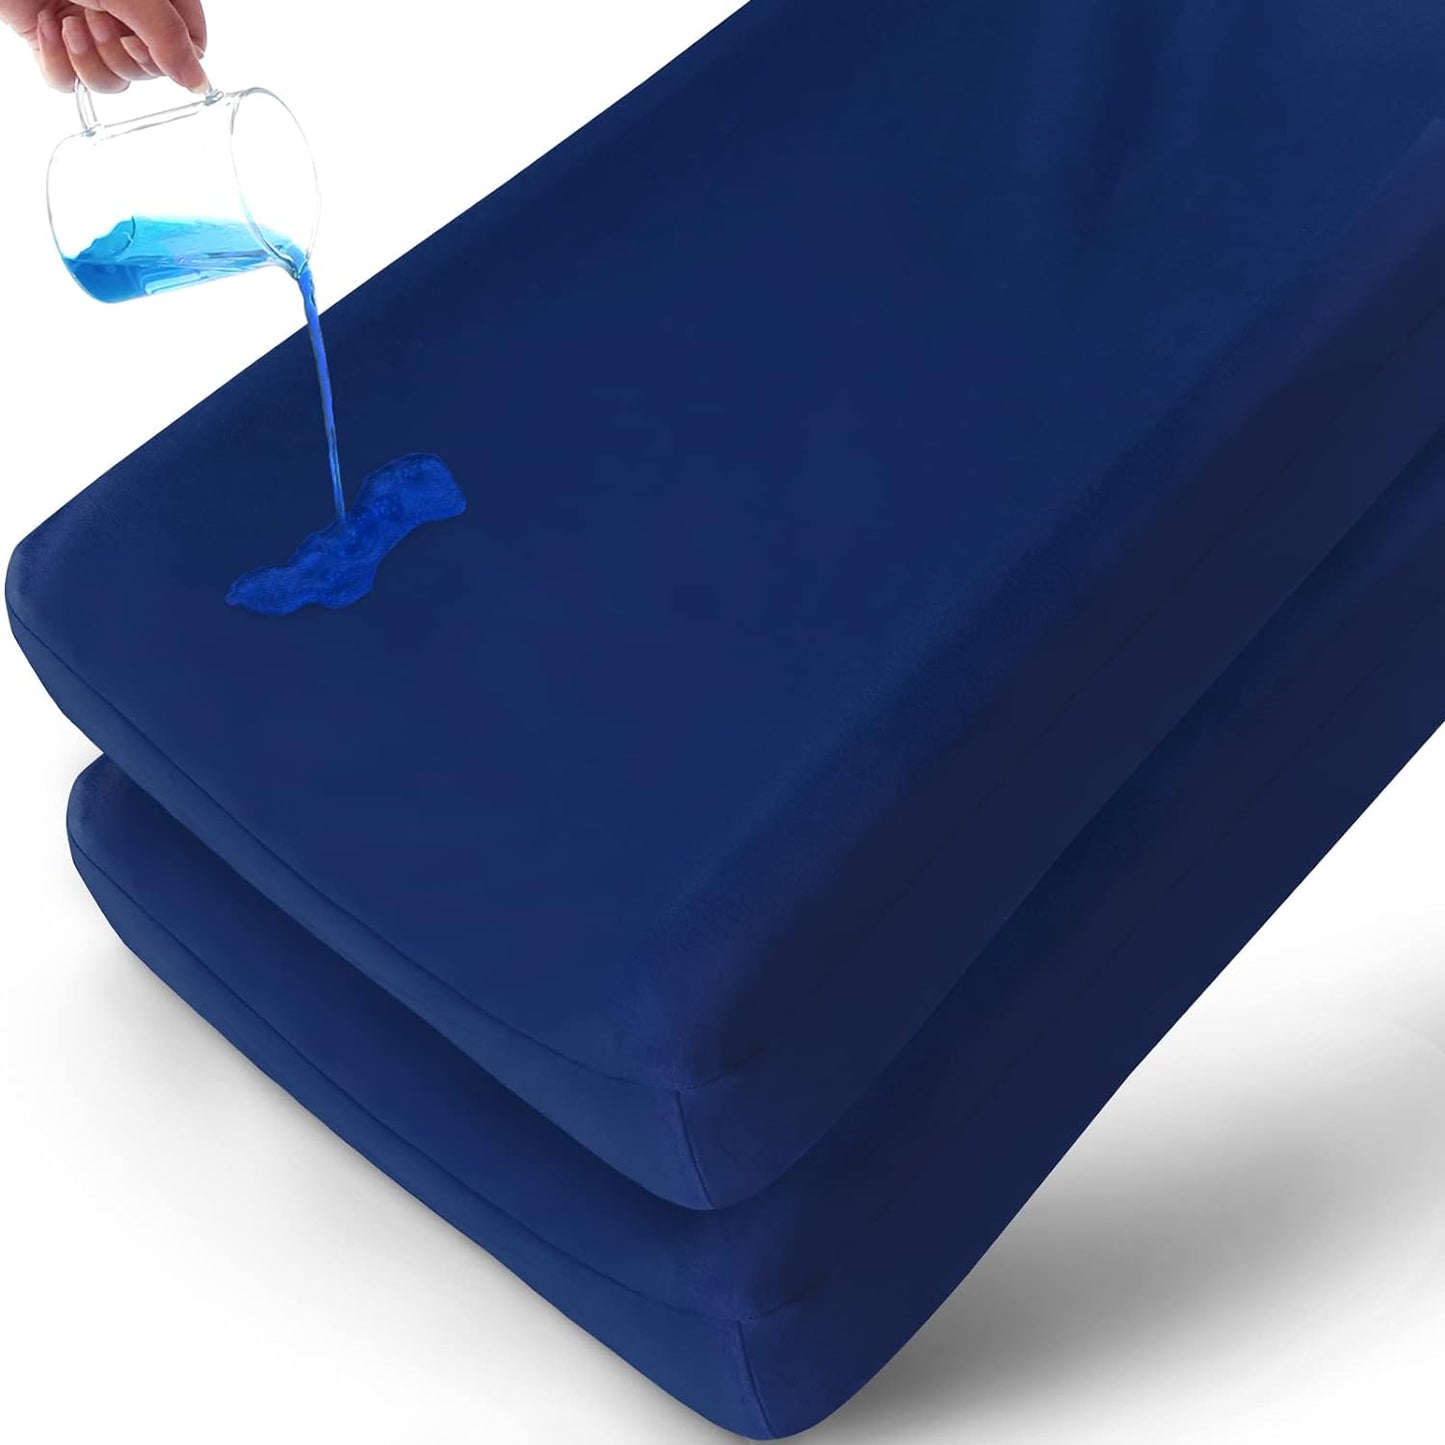 Waterproof Changing Pad Cover - 2 Pack, Ultra-Soft Microfiber, Smooth & Breathable, Navy - Biloban Online Store